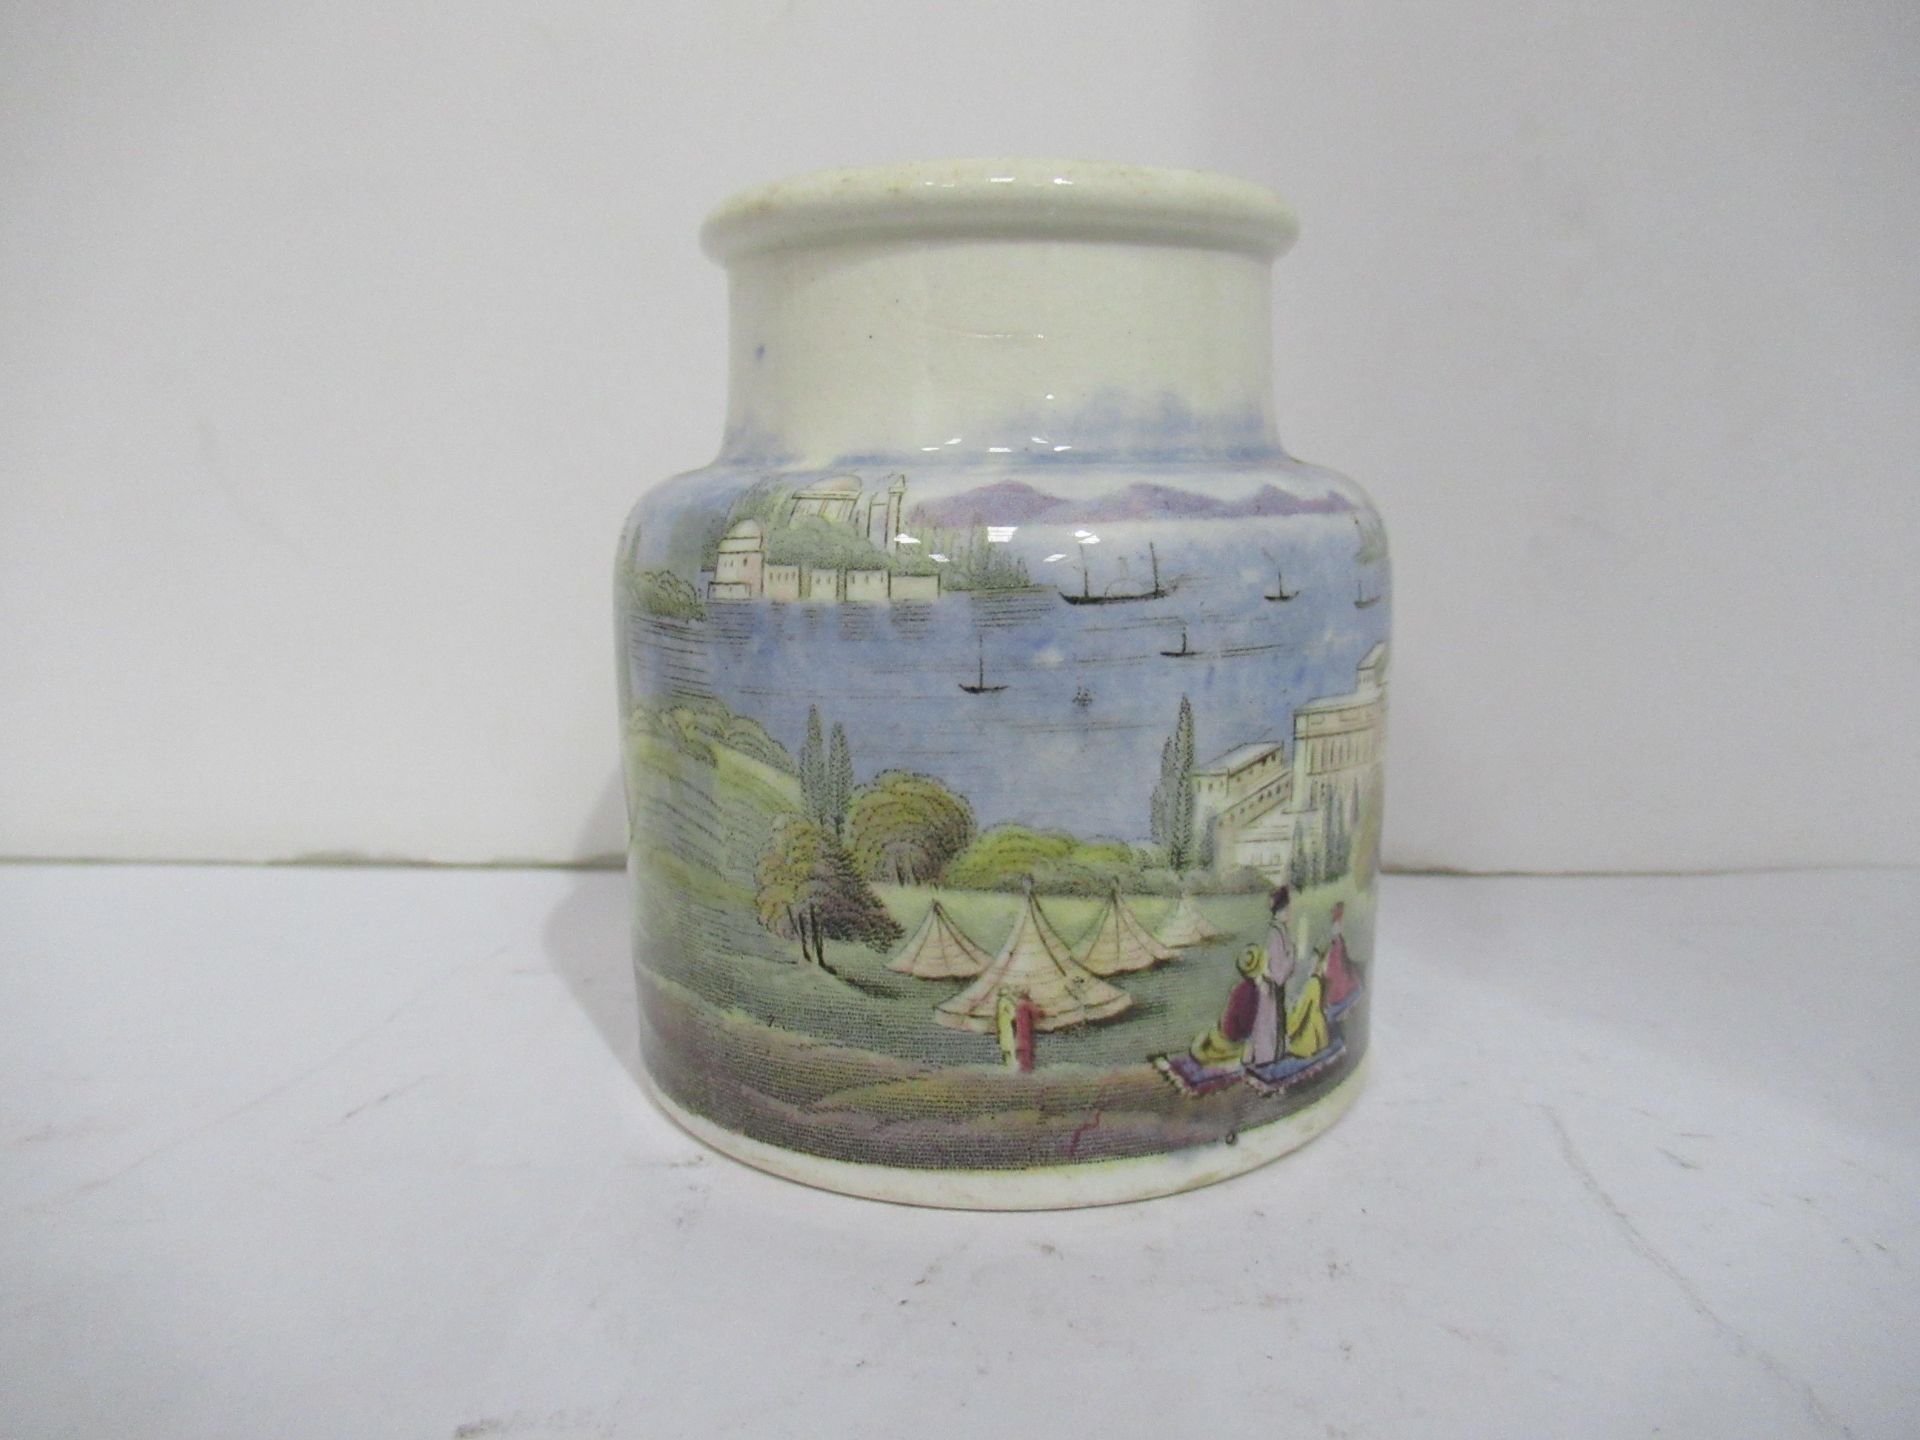 6x Prattware painted jars including one depicting Venice - Image 3 of 42